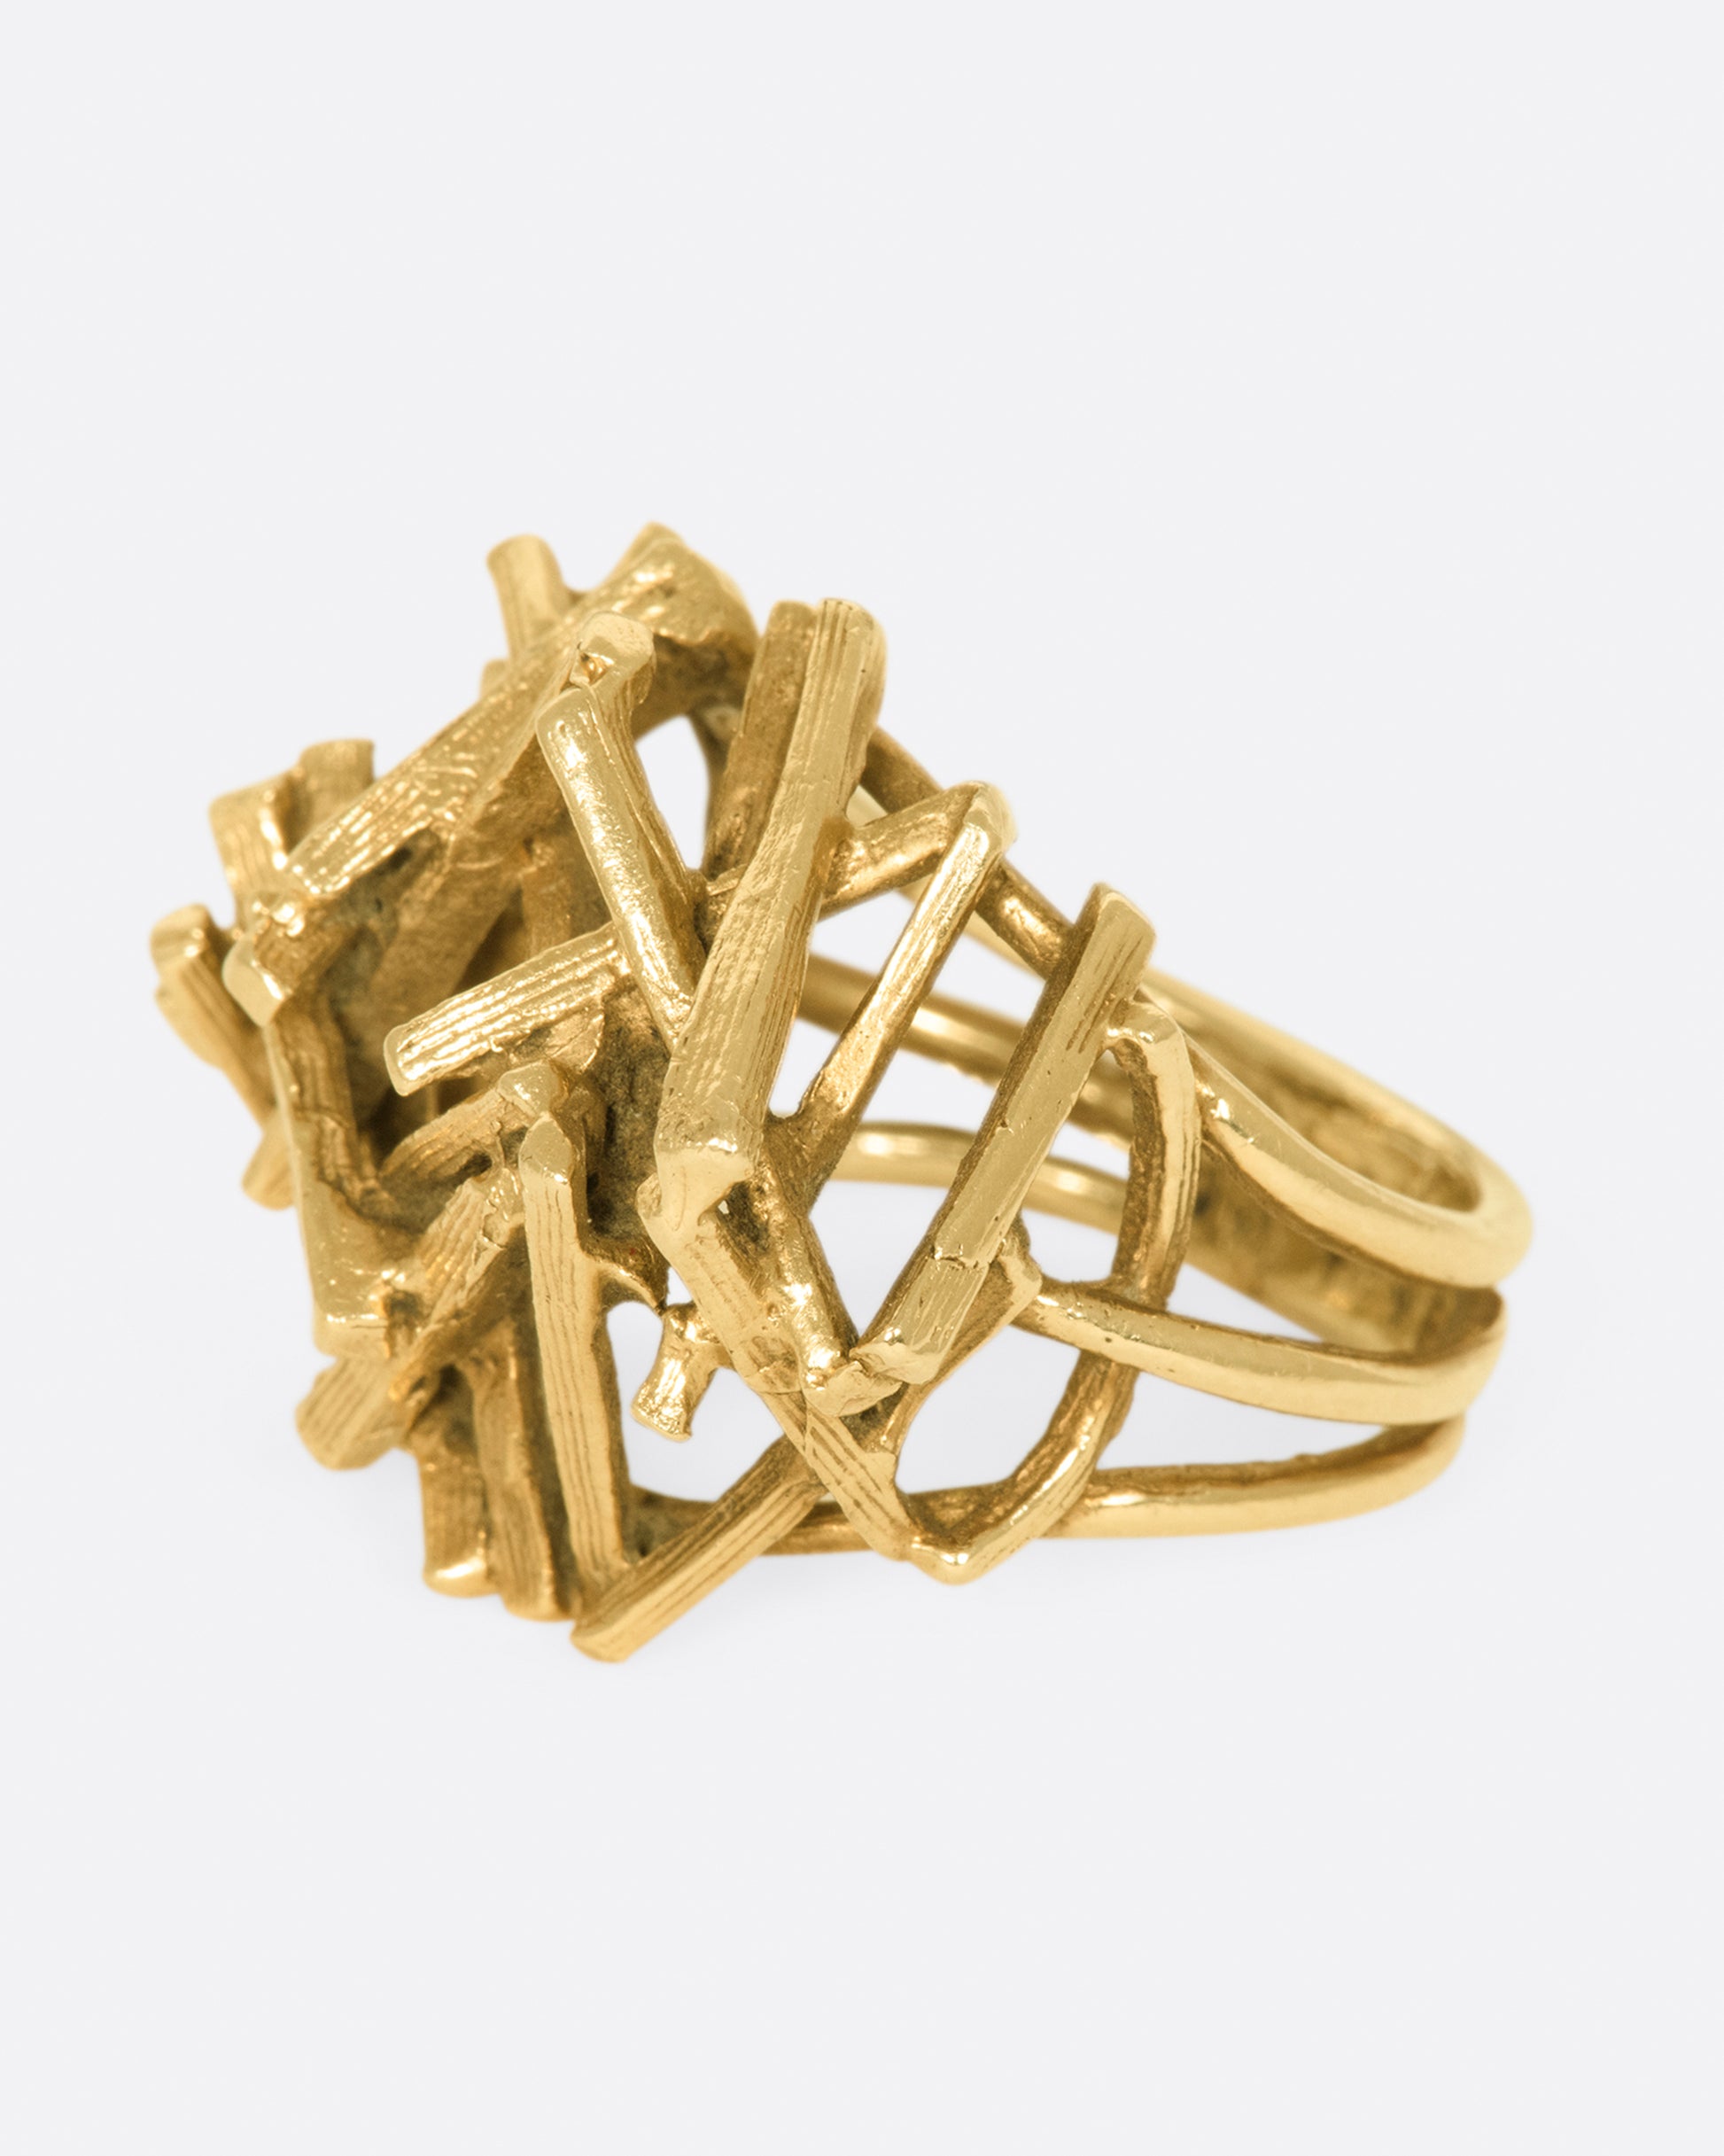 A vintage 15k gold pile of sticks ring that sits high above your finger in an incredible 3D dome